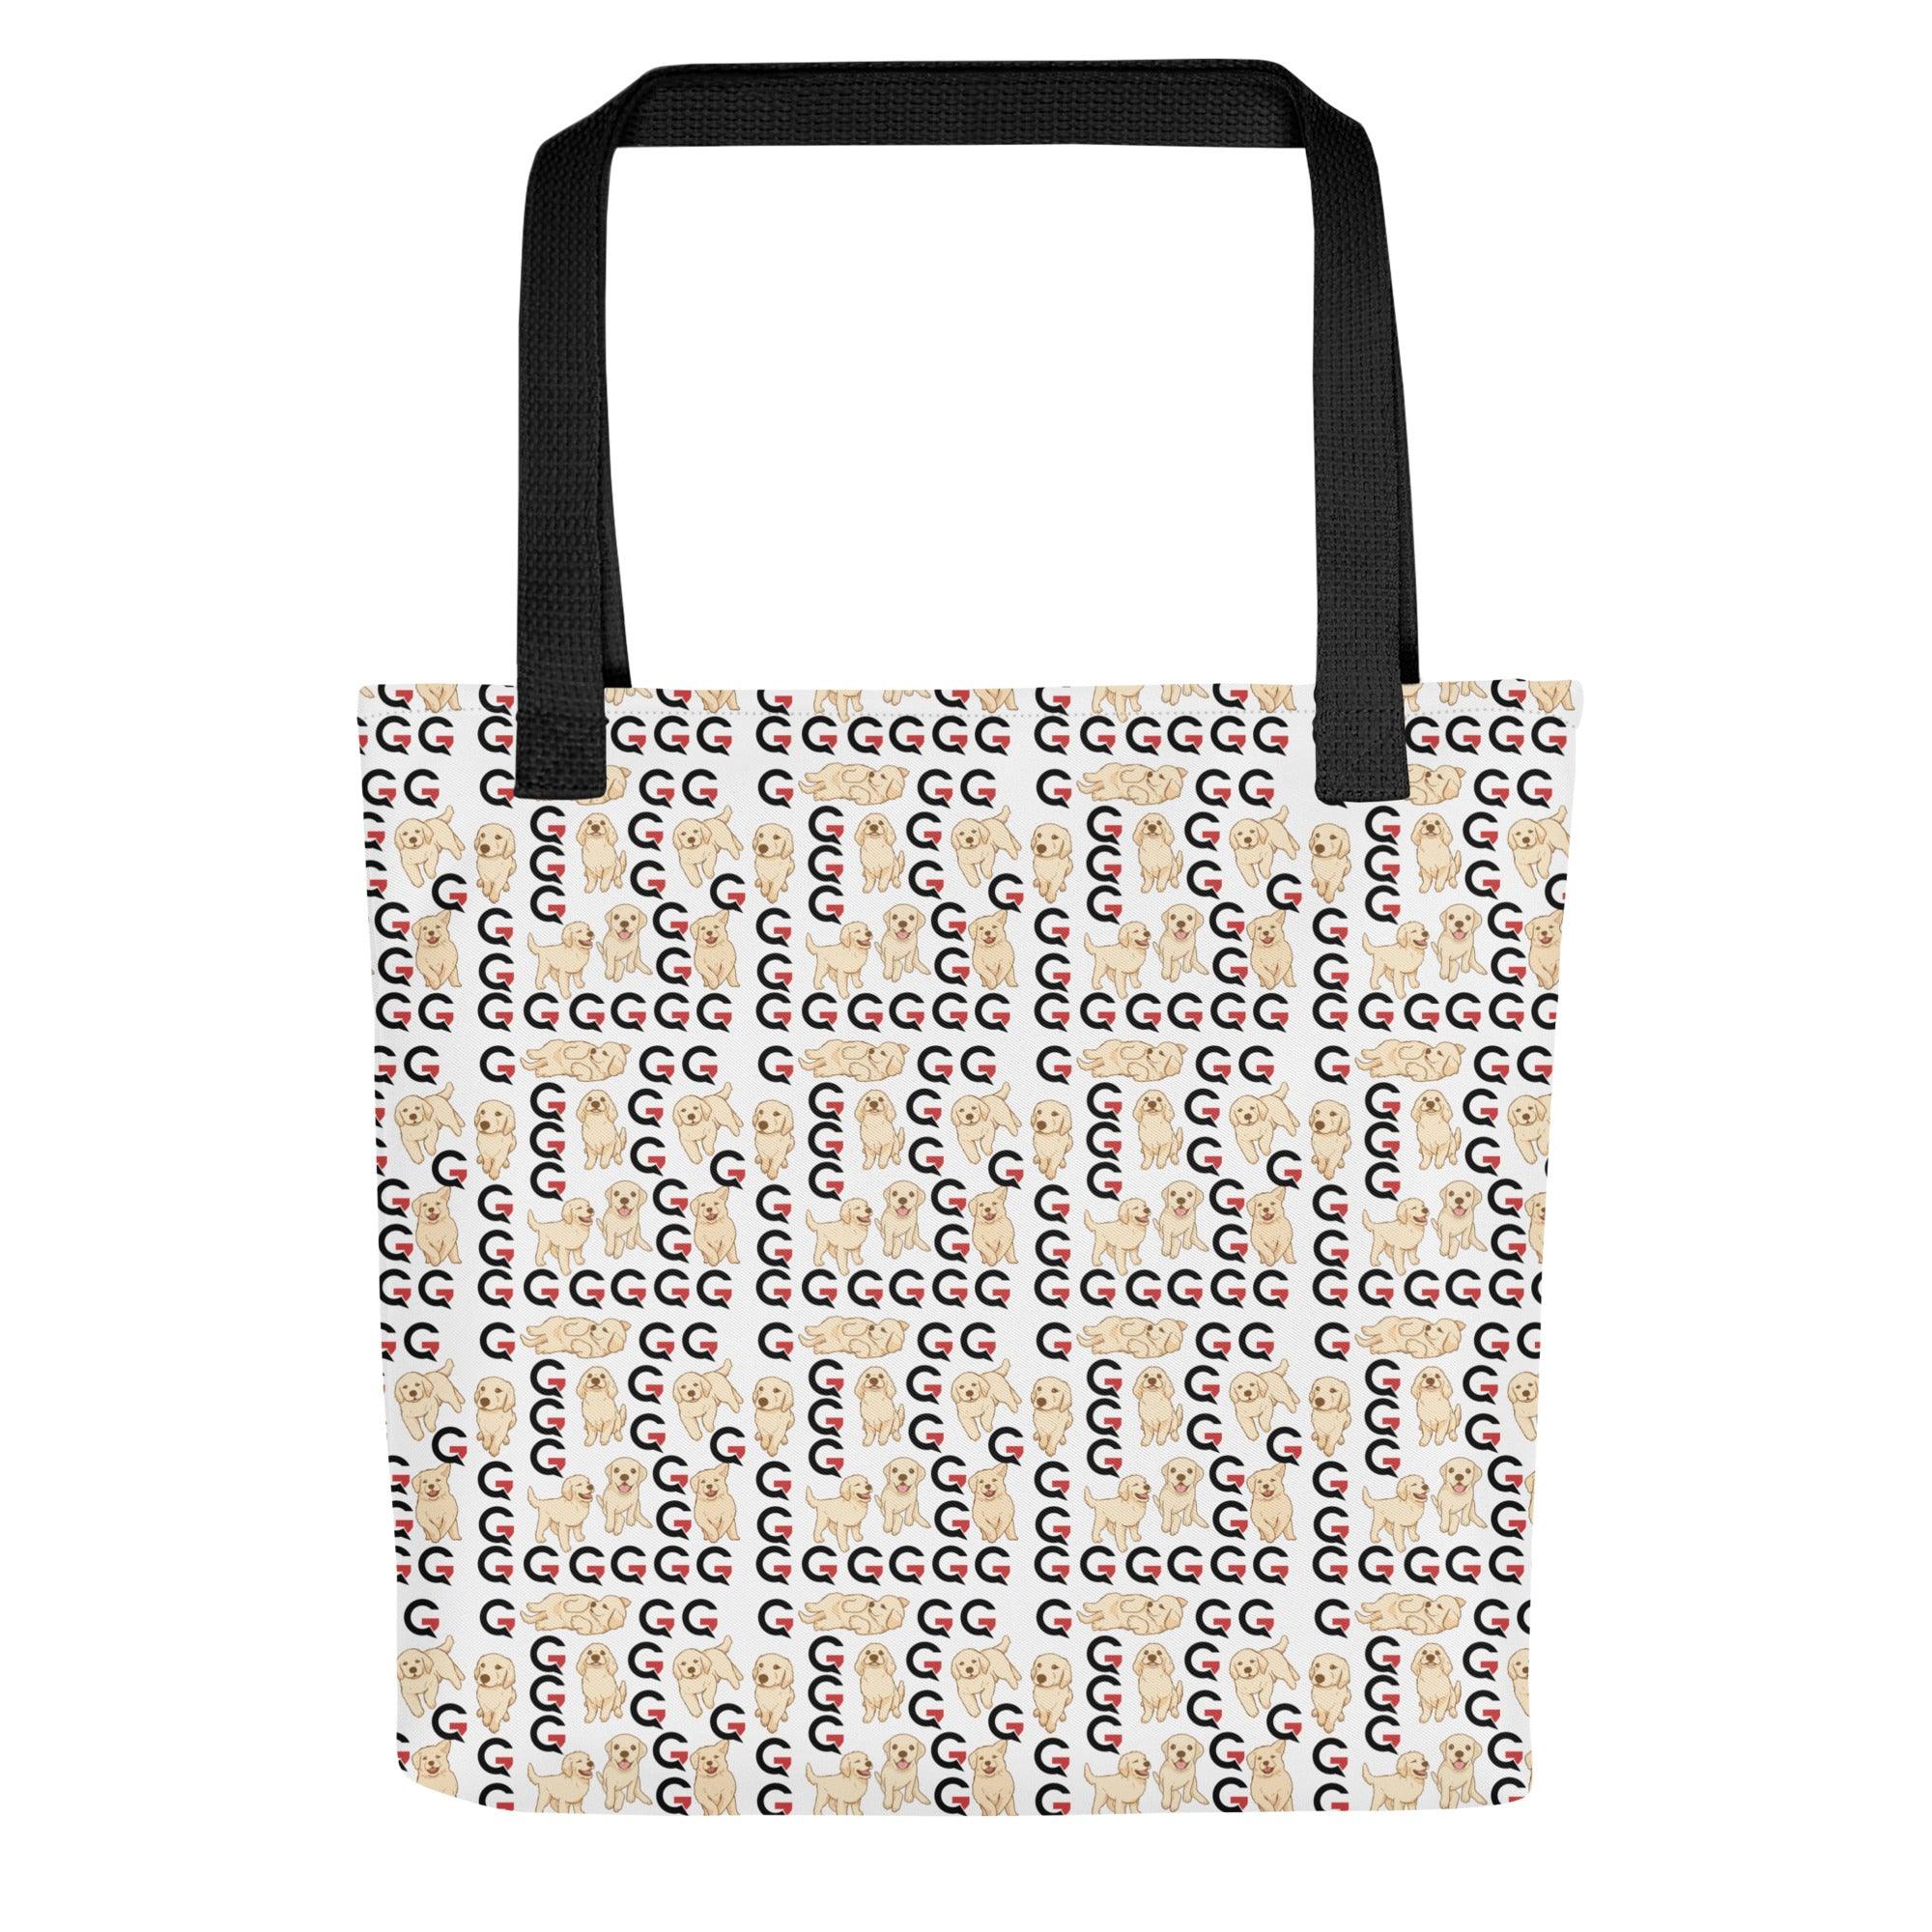 GEARTA - First Time Mixed Up Pattern Tote Bag